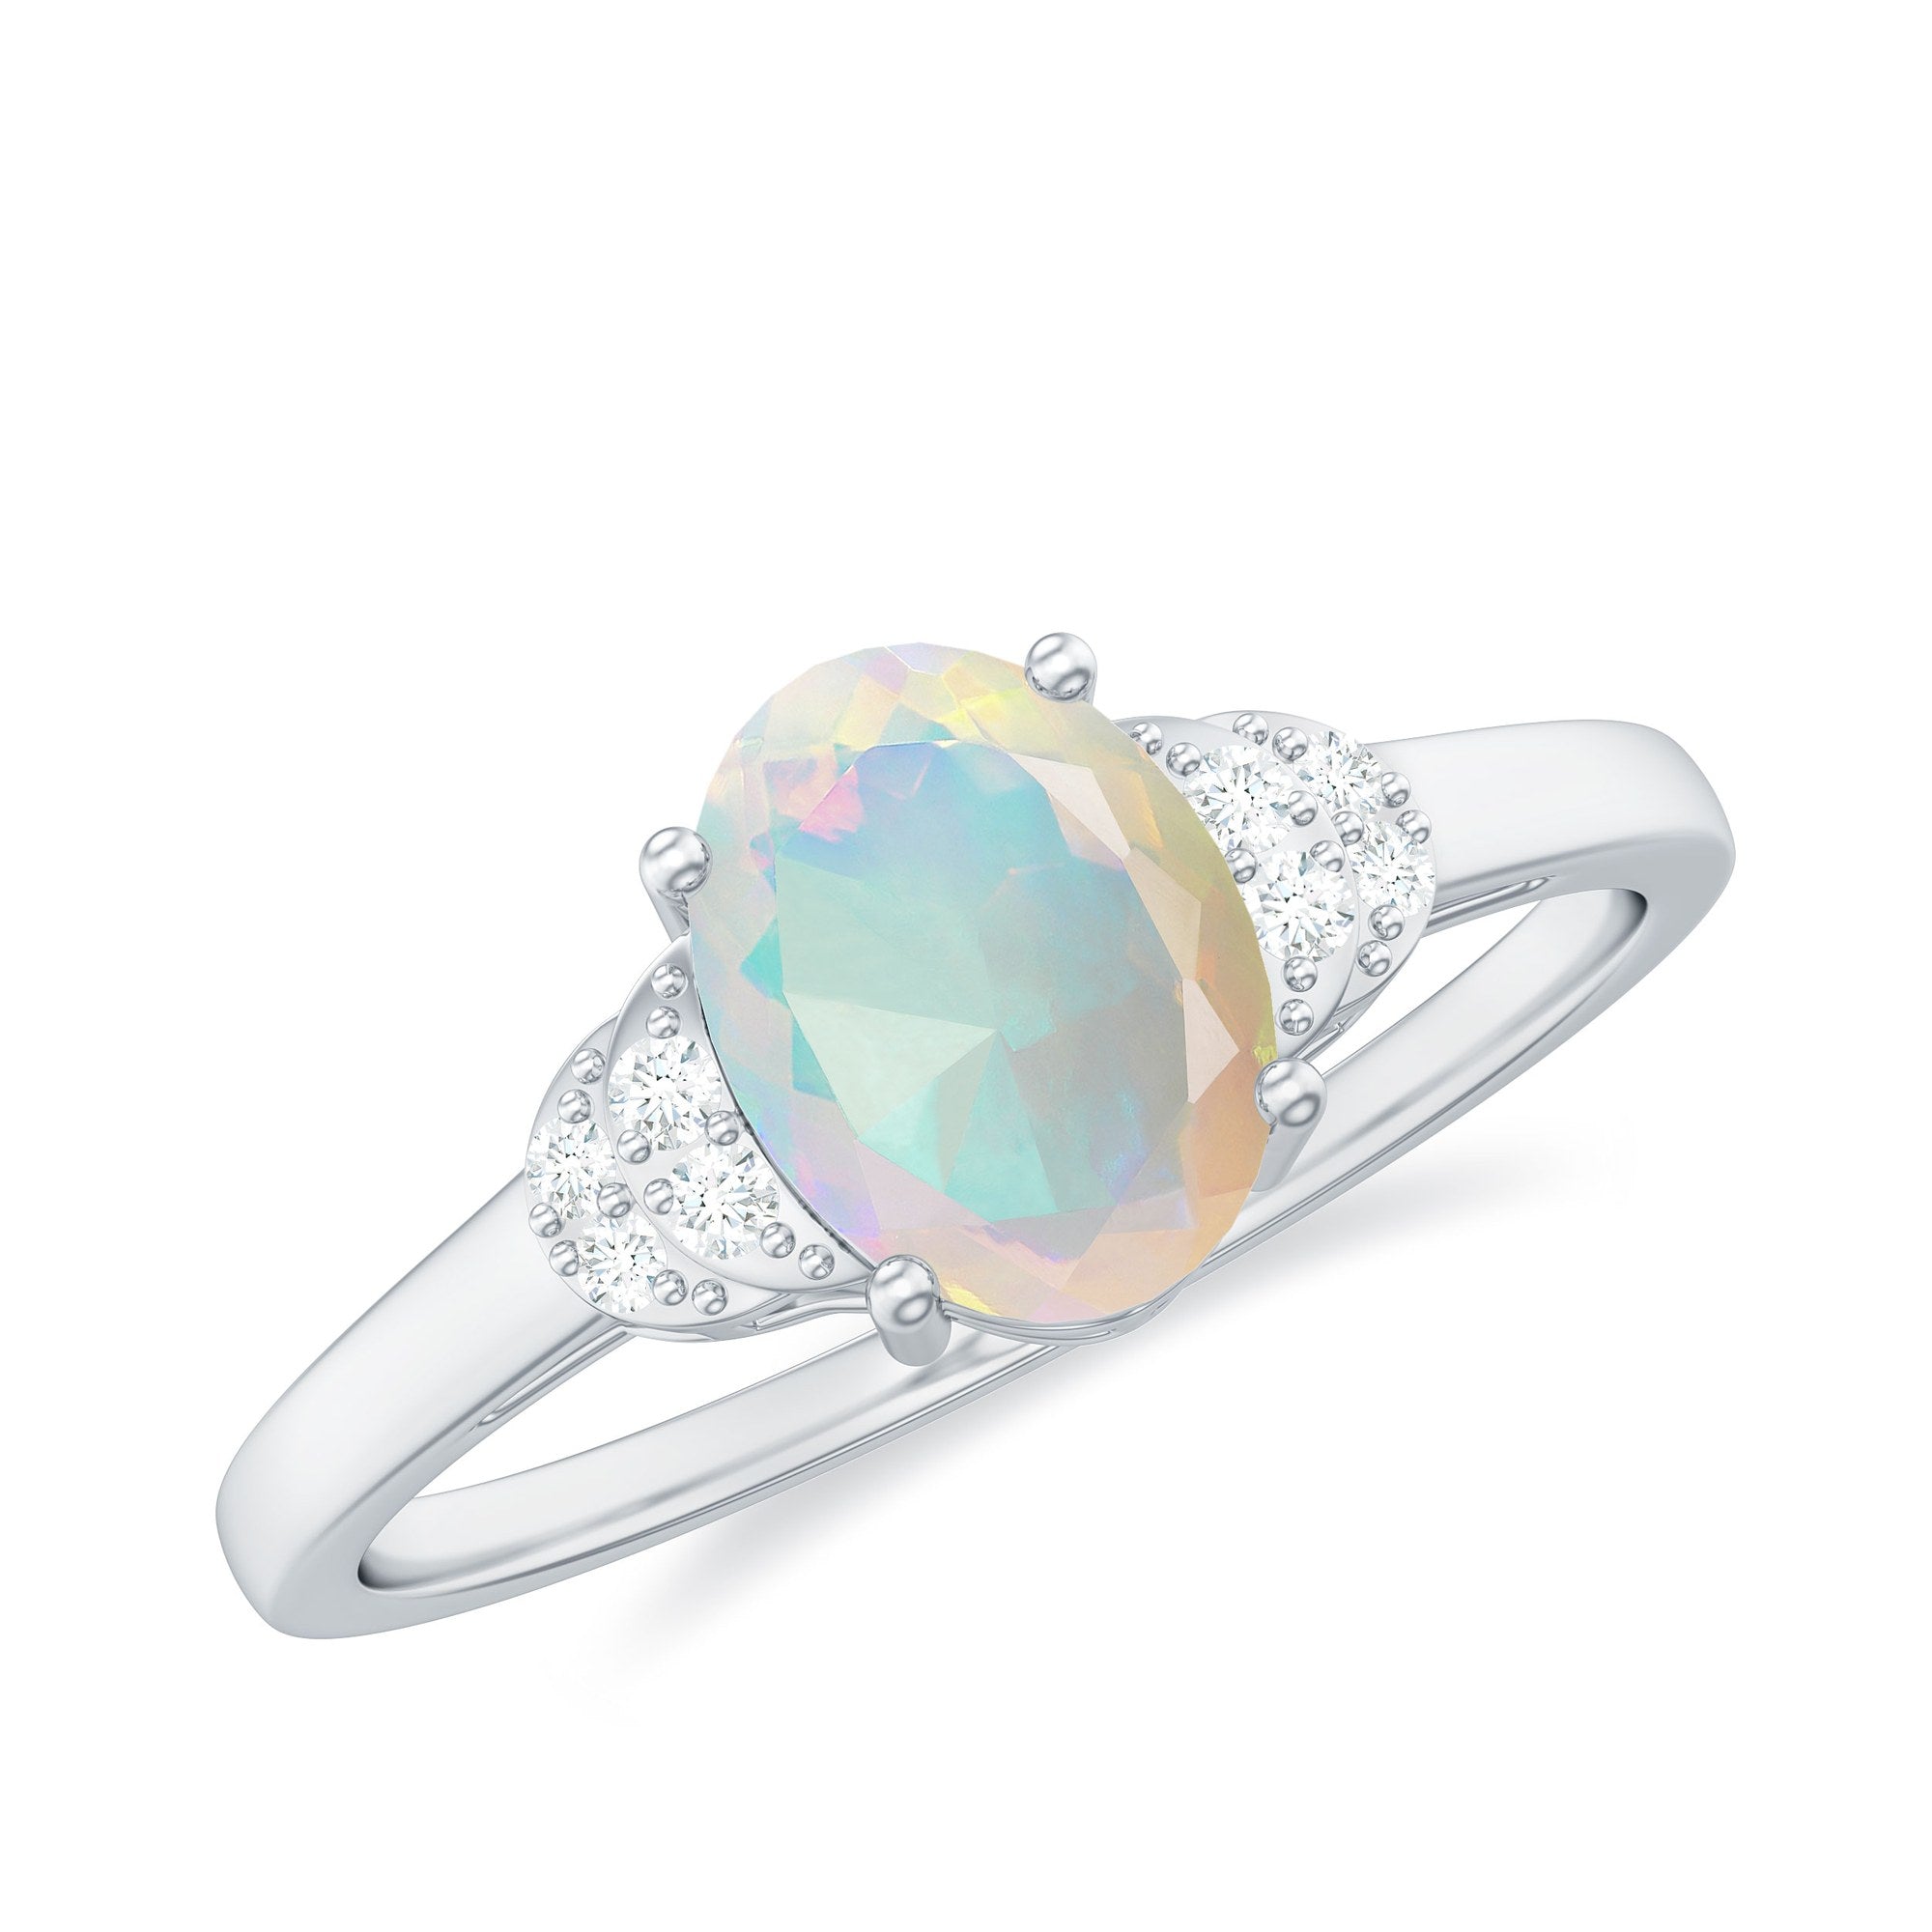 Natural Ethiopian Opal Engagement Ring With Moissanite - Rosec Jewels